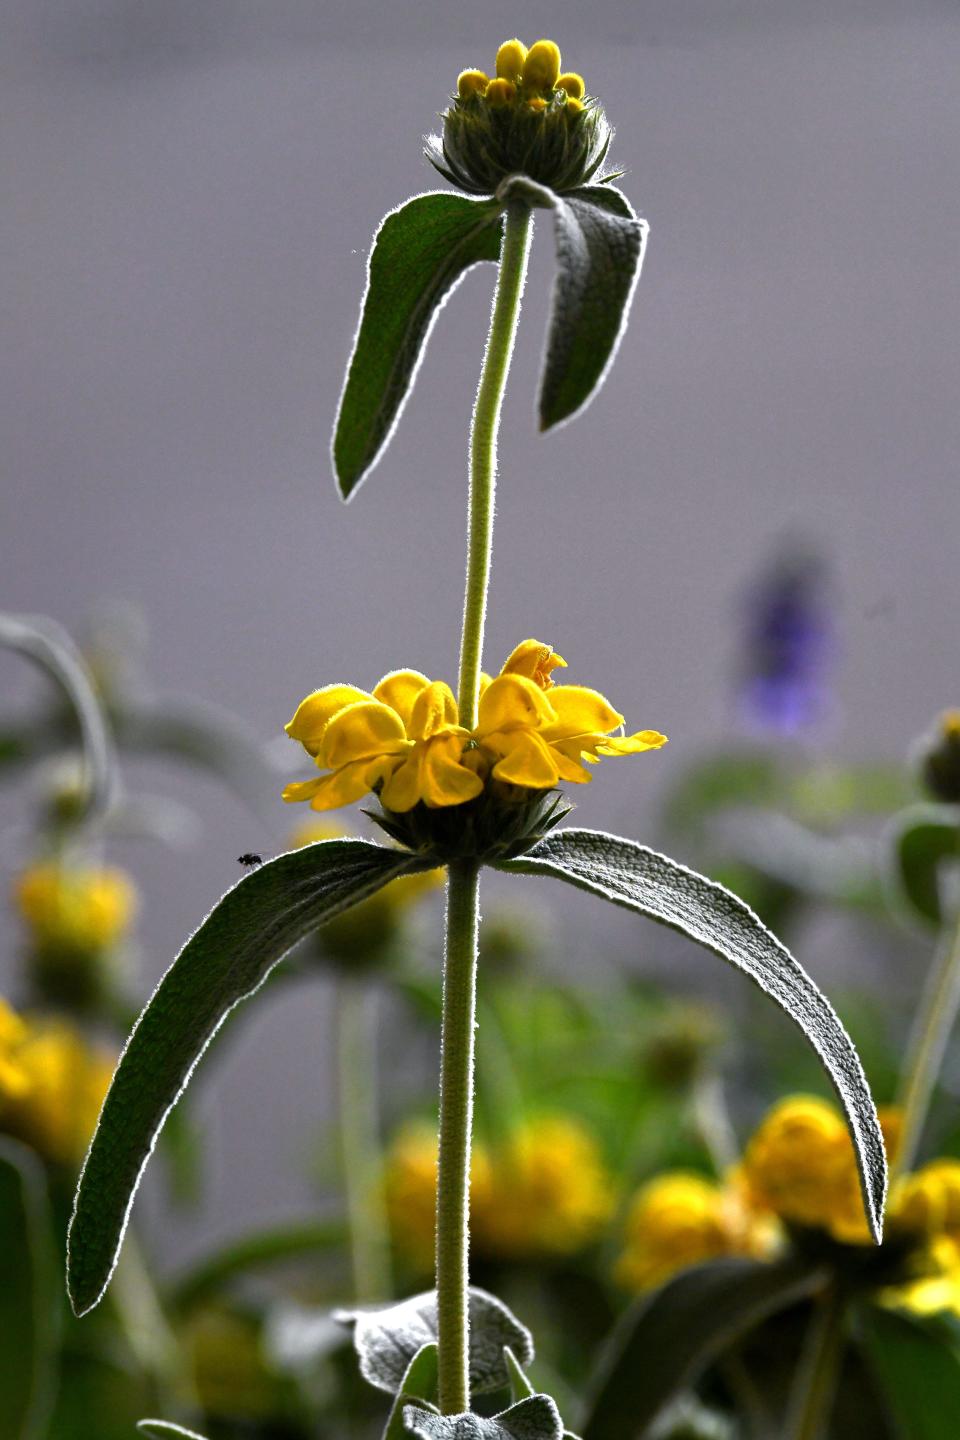 A Jerusalem Sage stands amid other plants at the Big Country Master Gardeners Spring Plant Sale Wednesday.